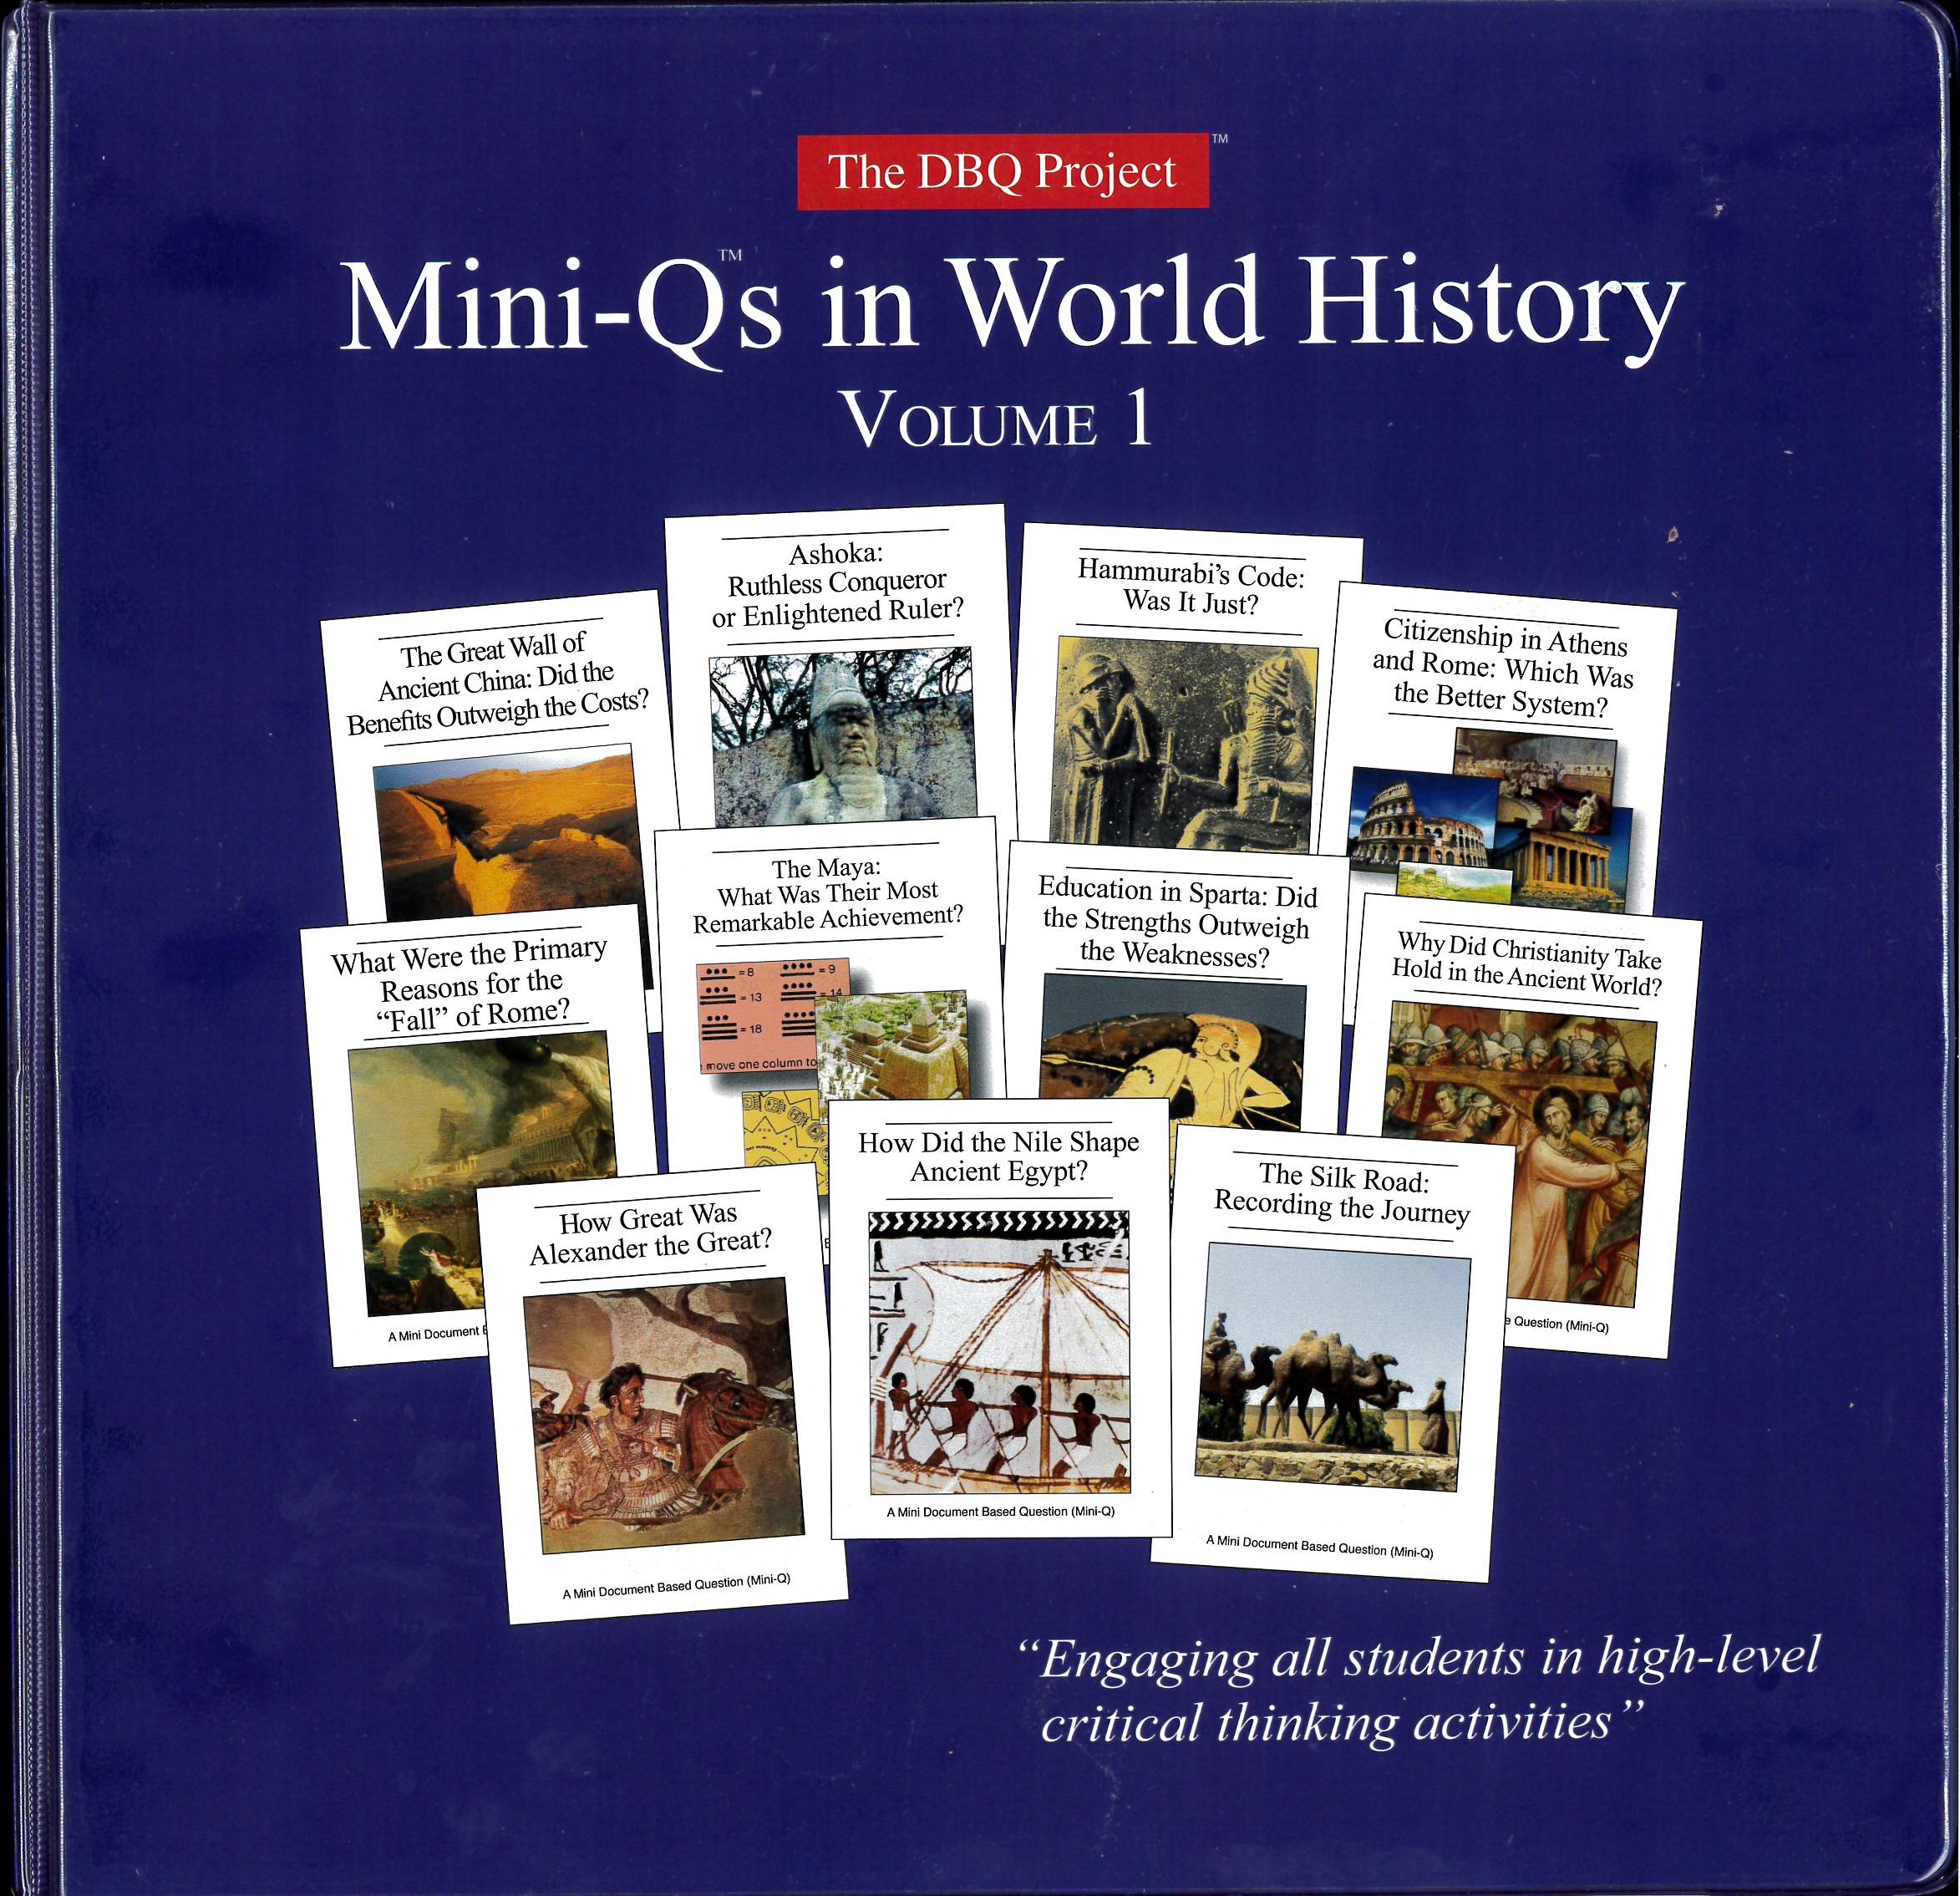 Mini-Qs in world history volume 1 : engaging all students in high-level critical thinking activities